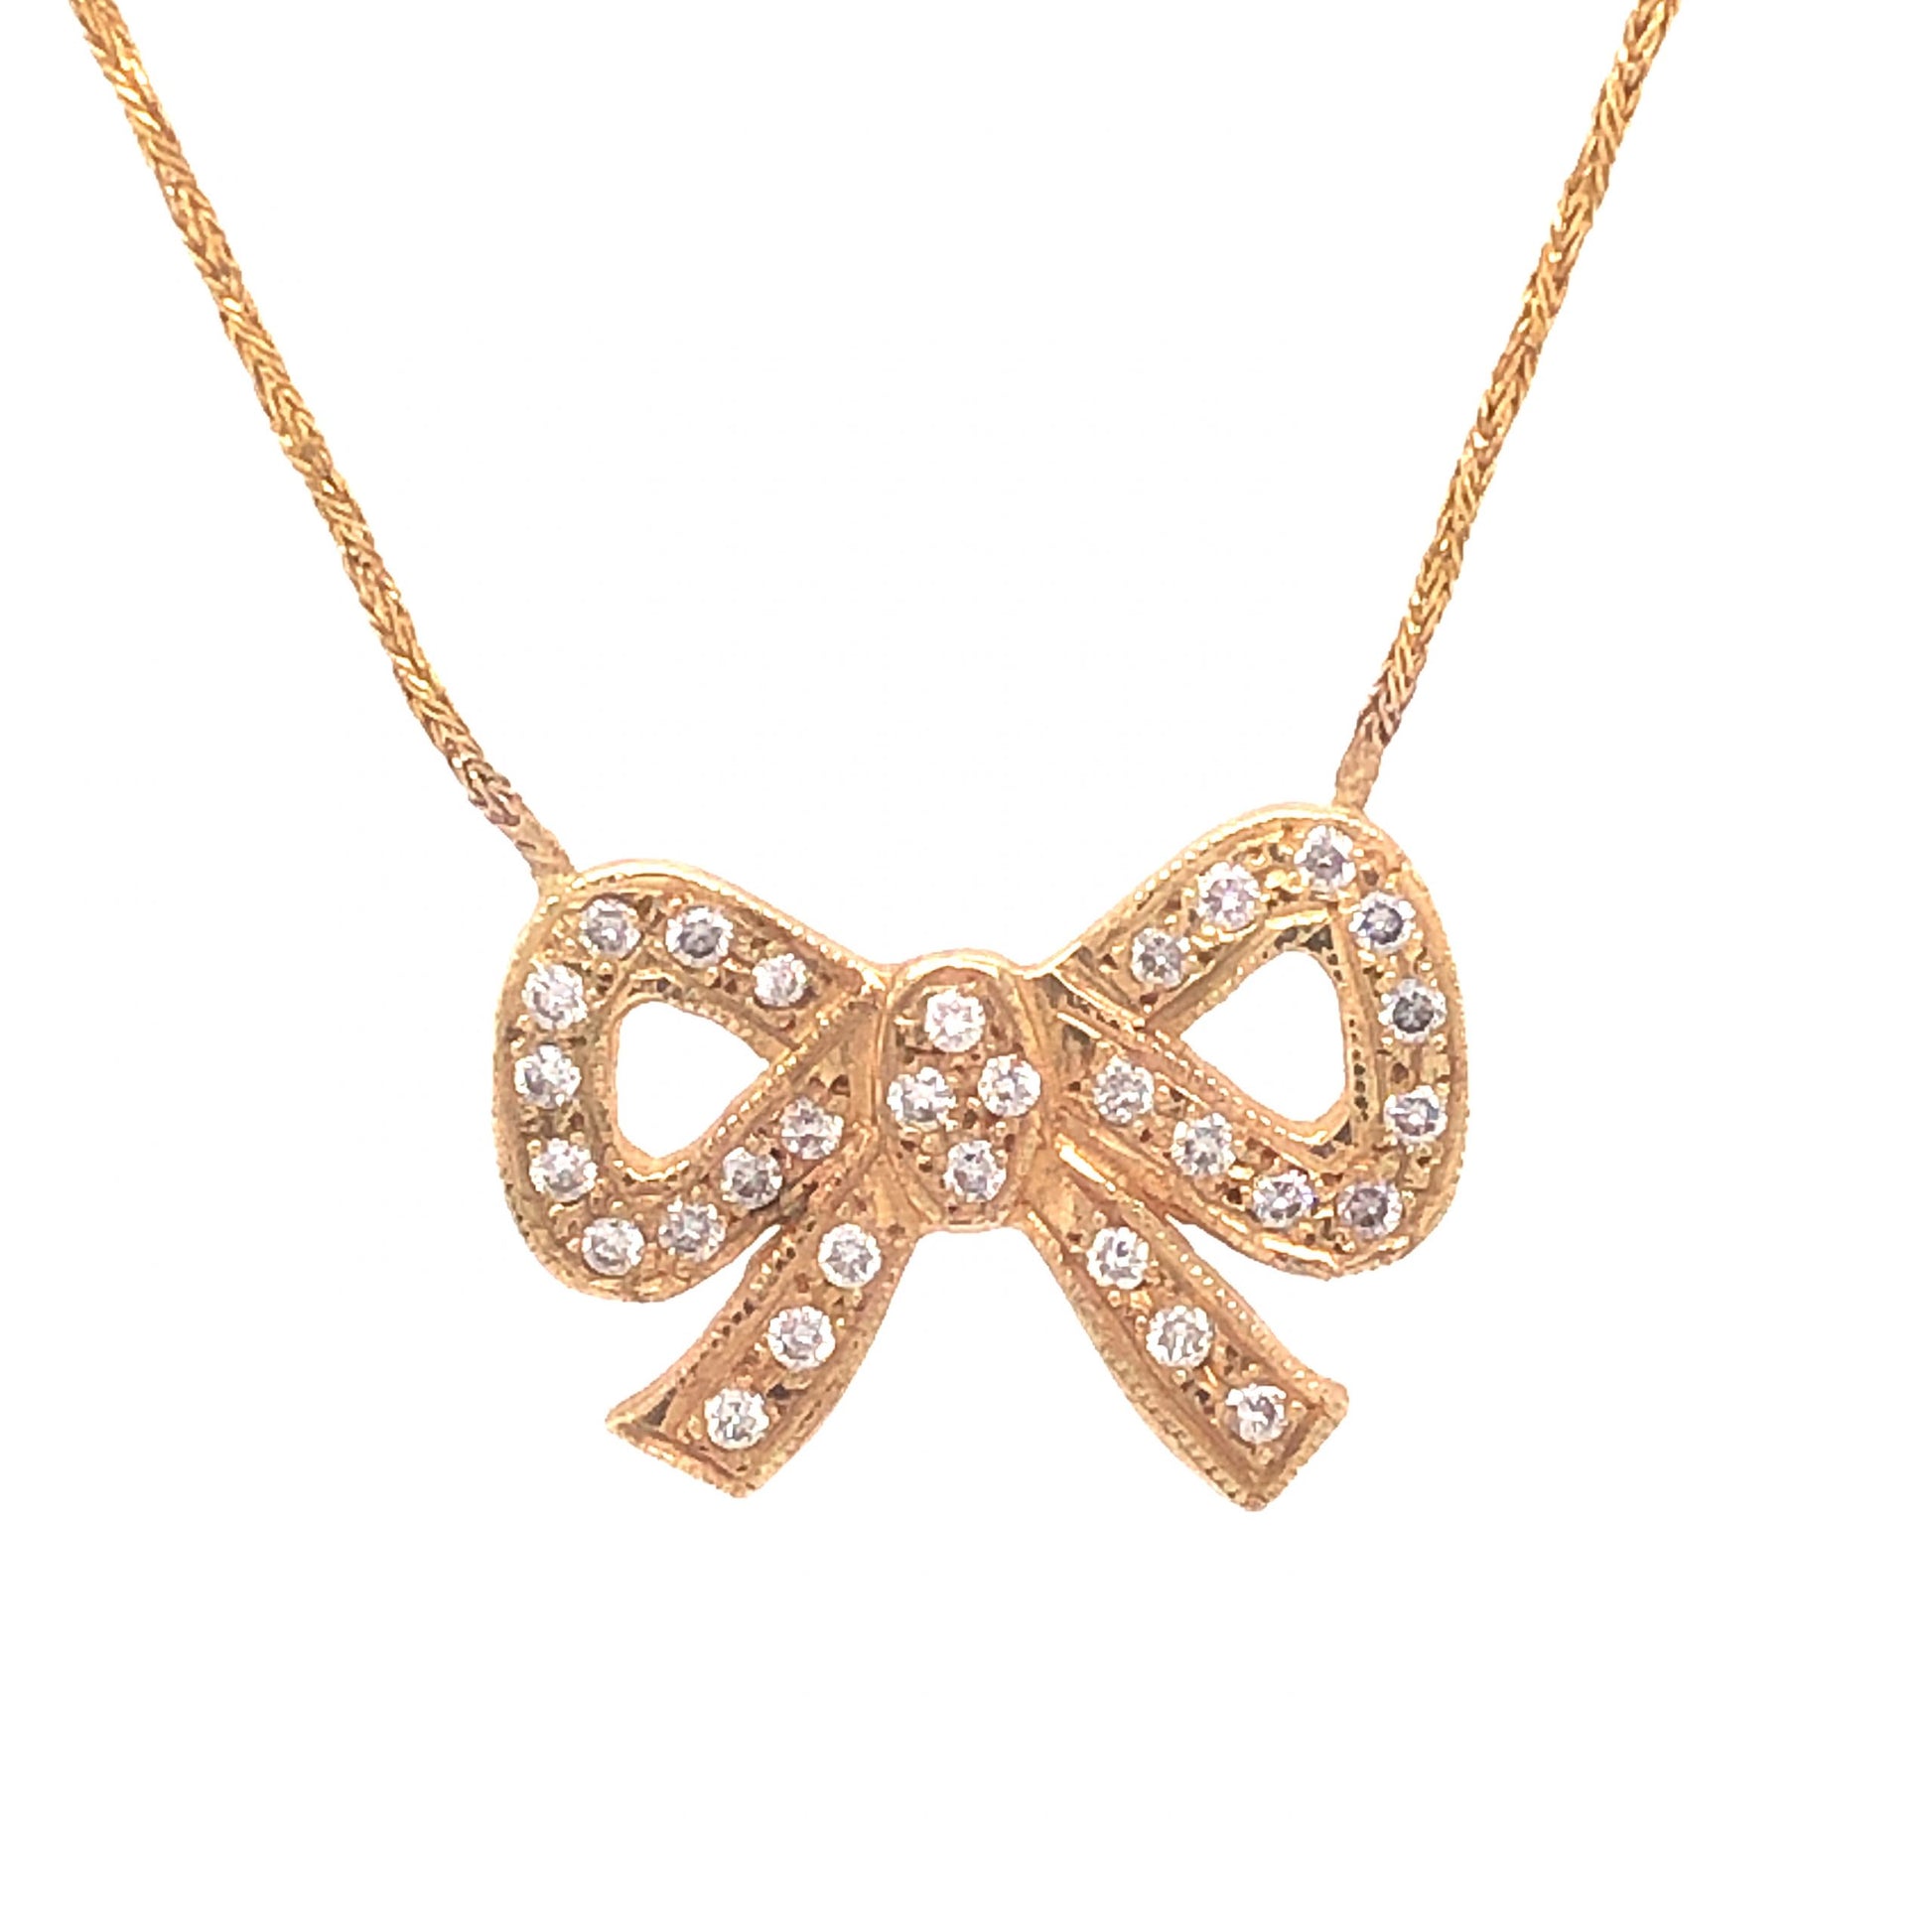 Diamond Bow Pendant Necklace in 10K Yellow Gold